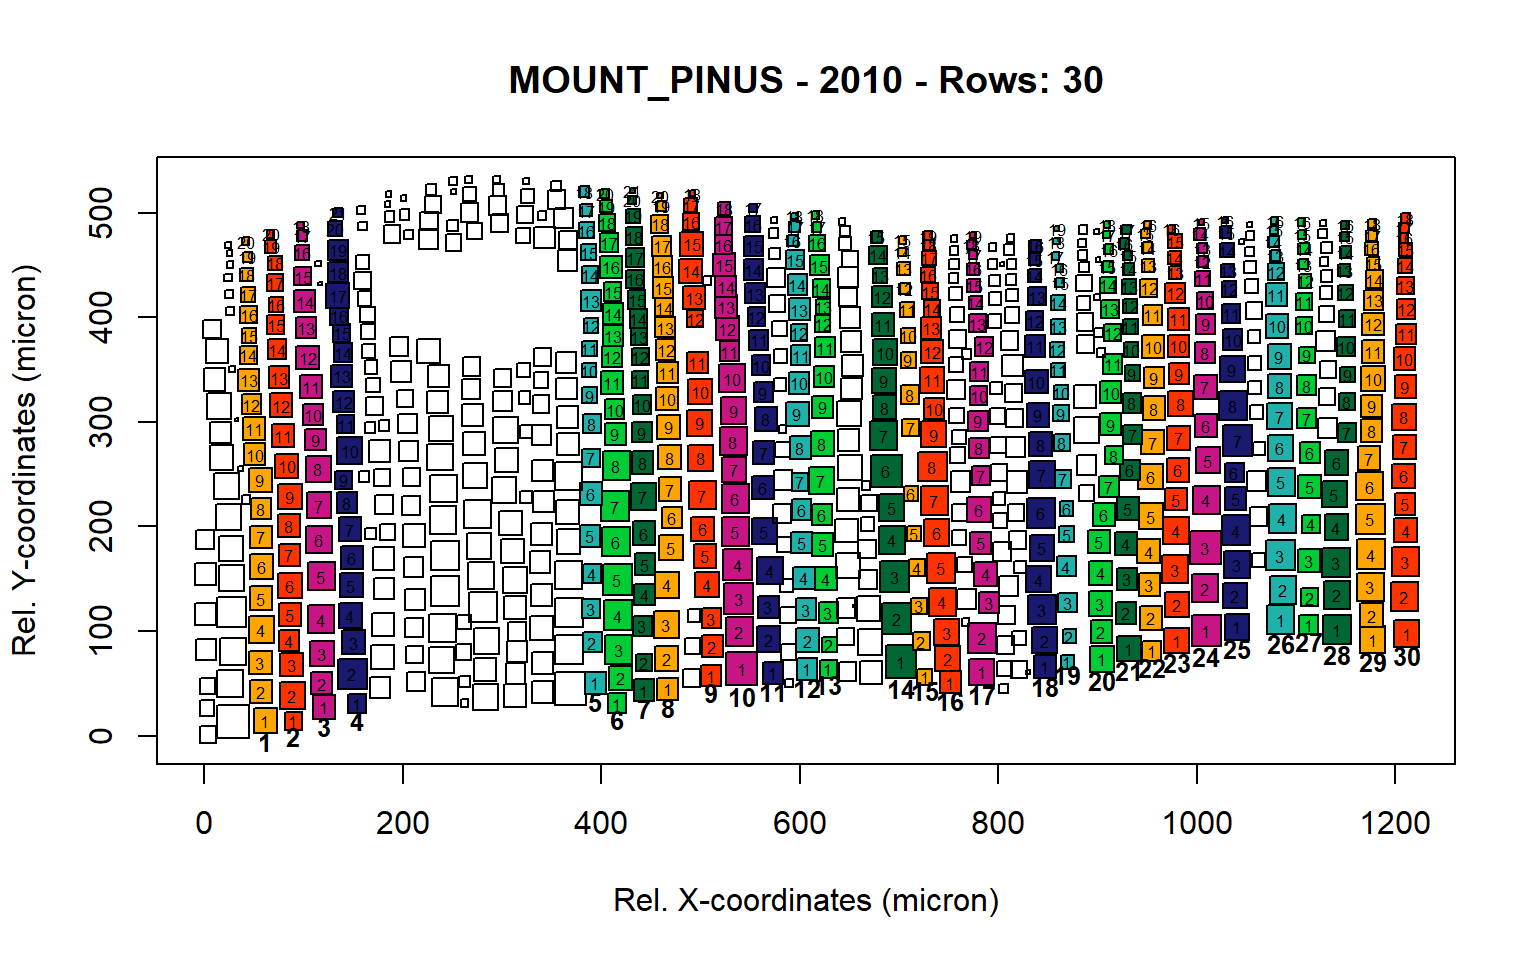 Standard plots generated by the write.output() function for mountain Pinus cembra (species="MOUNT_PINUS"), including 2007, 2008, 2009 and 2010.